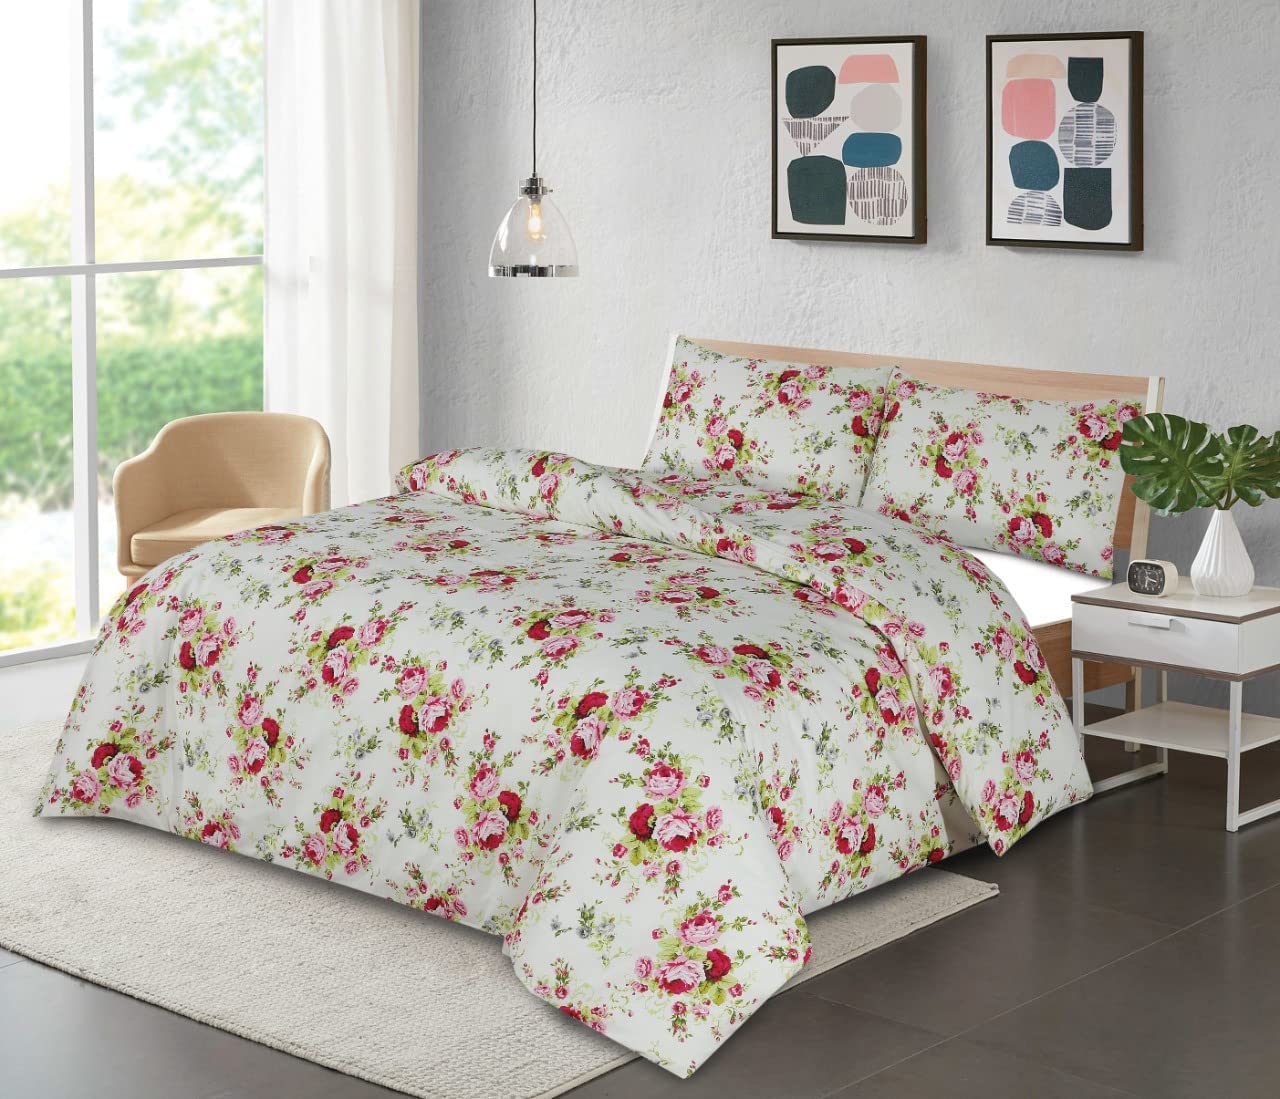 AmigoZone Duvet Cover Set Beautiful Floral Print Quilt Cover Set With Pillow Cases